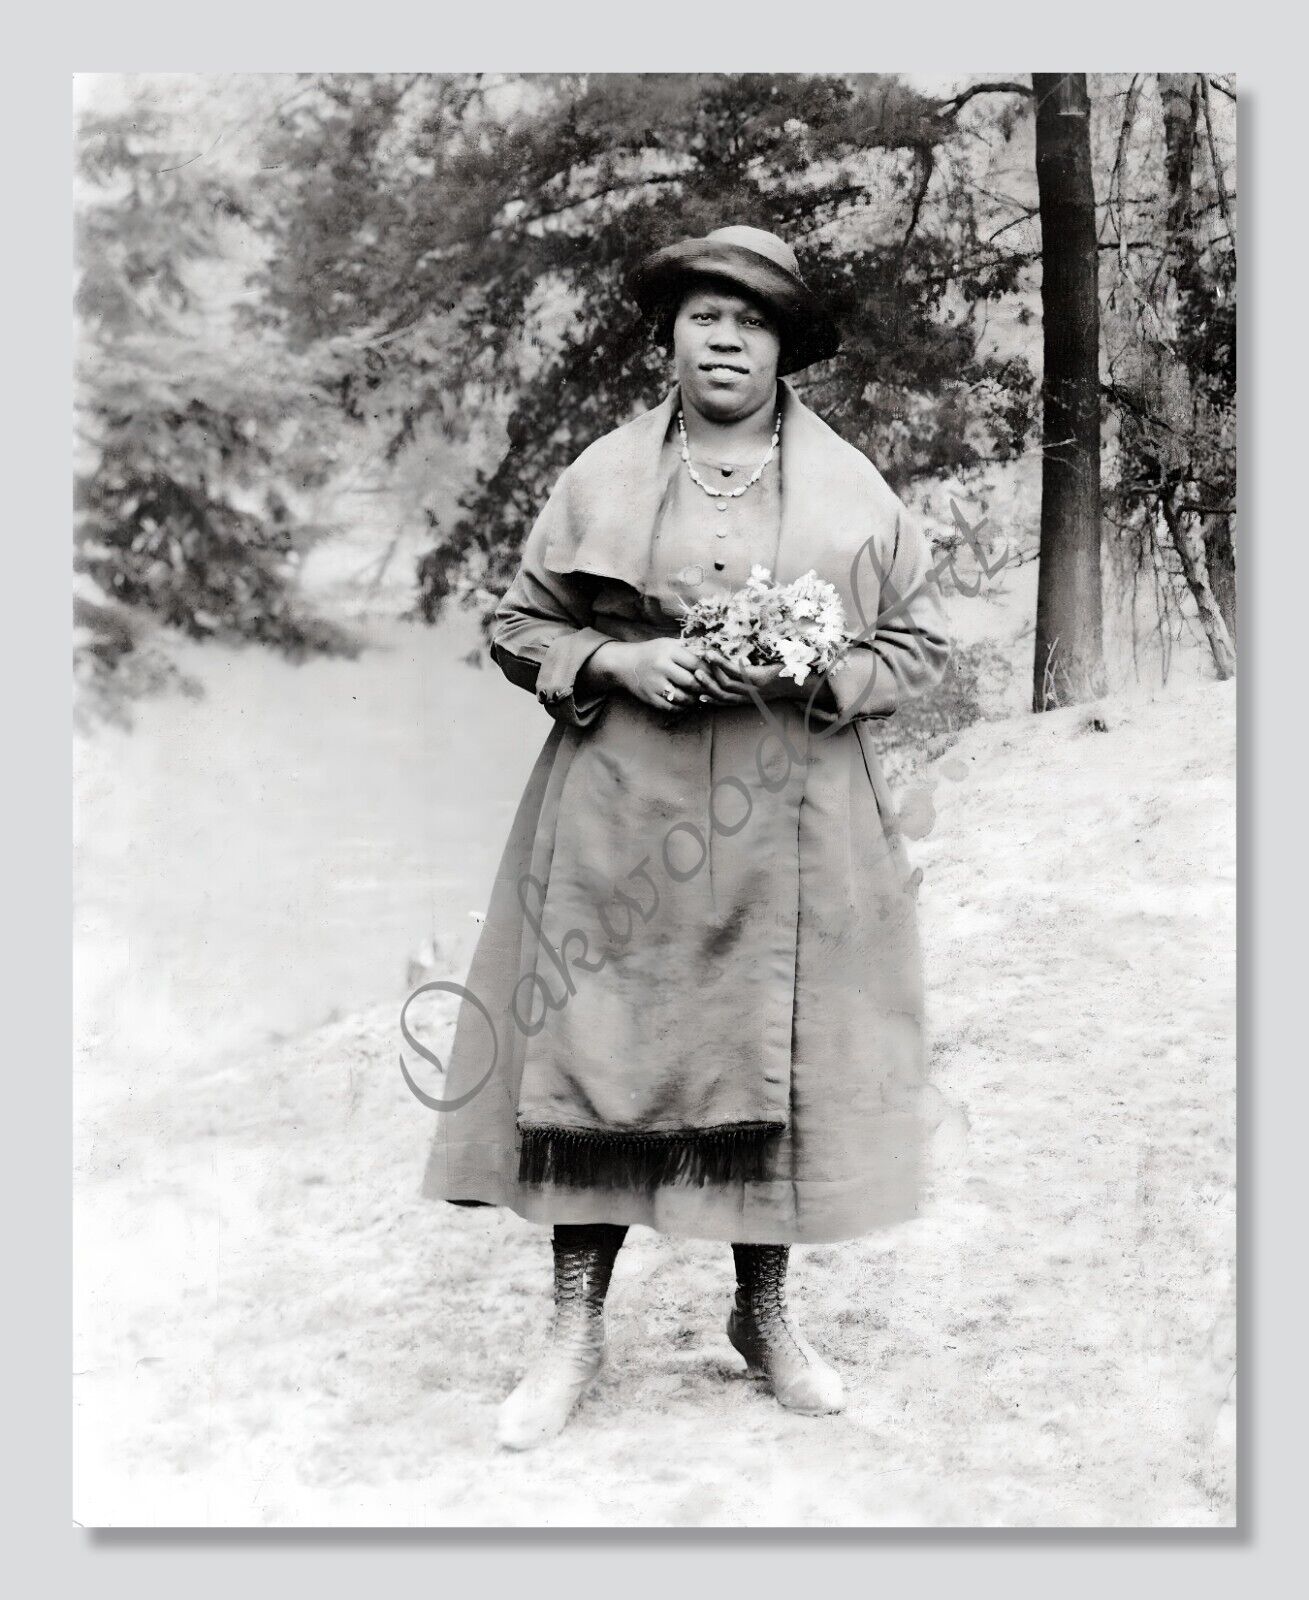 Woman in Edwardian Boots Holding Flowers c1910s, Vintage Photo Reproduction